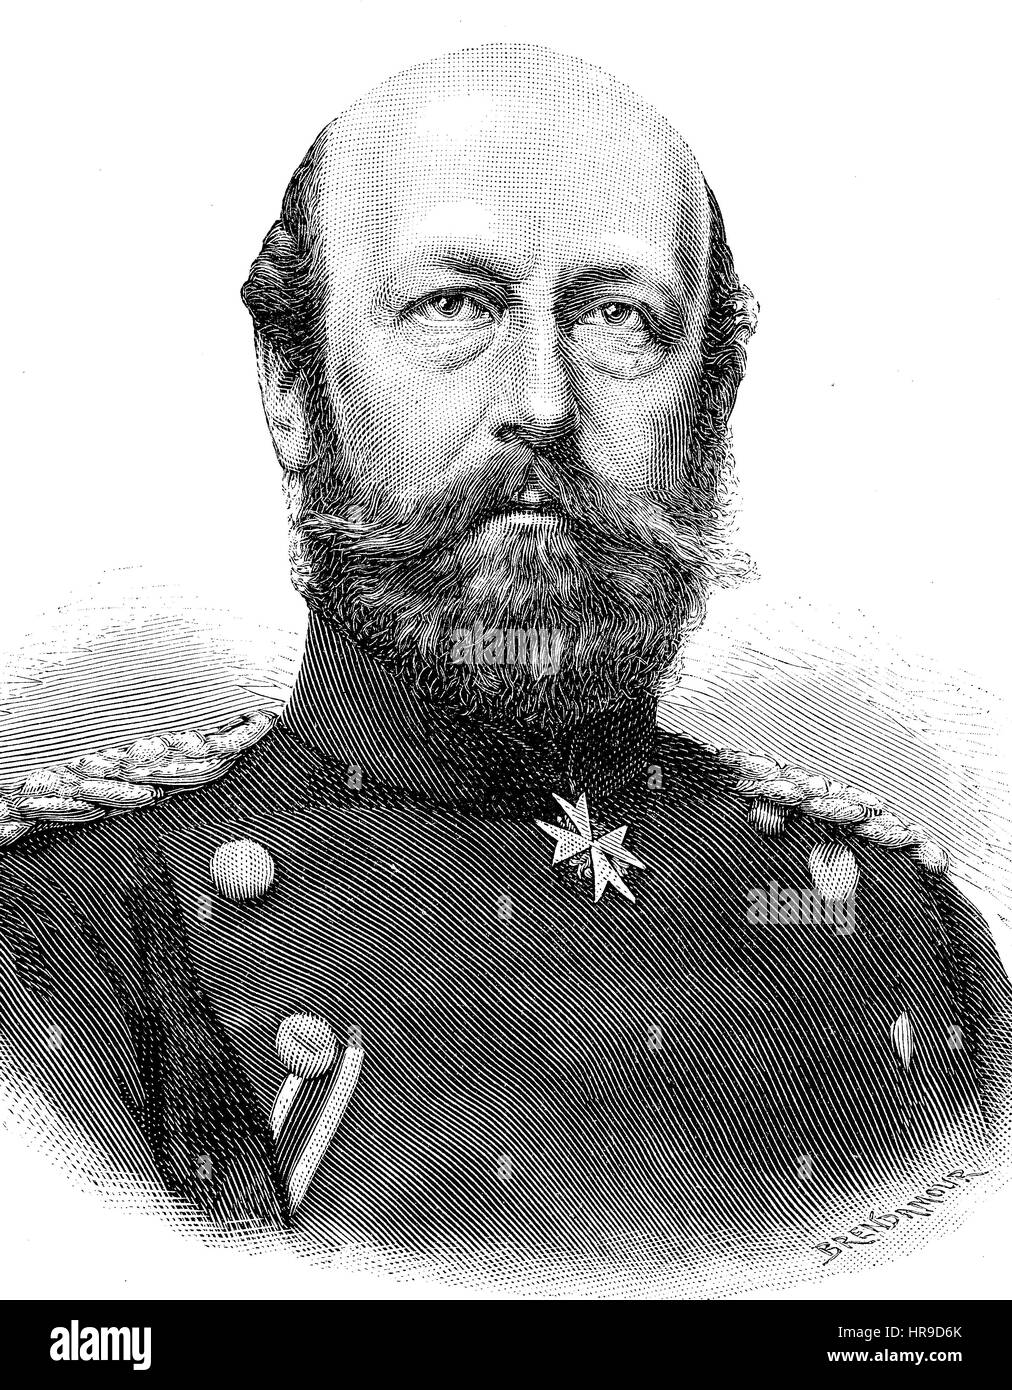 Frederick Francis II., 1823 - 1883, was a Prussian officer and Grand Duke of Mecklenburg-Schwerin from 7 March 1842 until 15 April 1883, Situation from the time of The Franco-Prussian War or Franco-German War,  Deutsch-Franzoesischer Krieg, 1870-1871, Reproduction of an original woodcut from the year 1885, digital improved Stock Photo